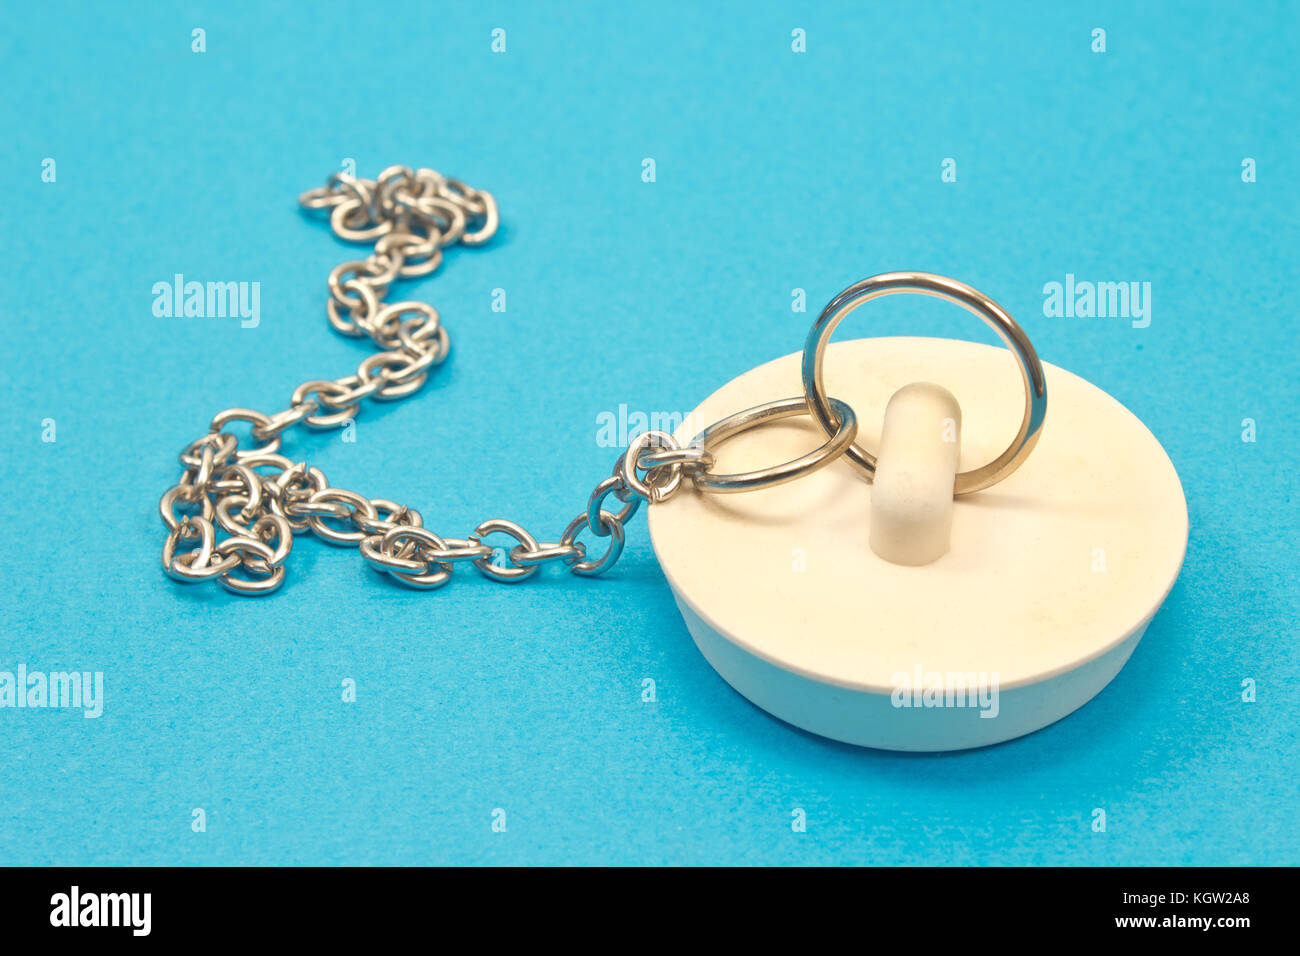 Sink plug with chain isolated on blue background Stock Photo